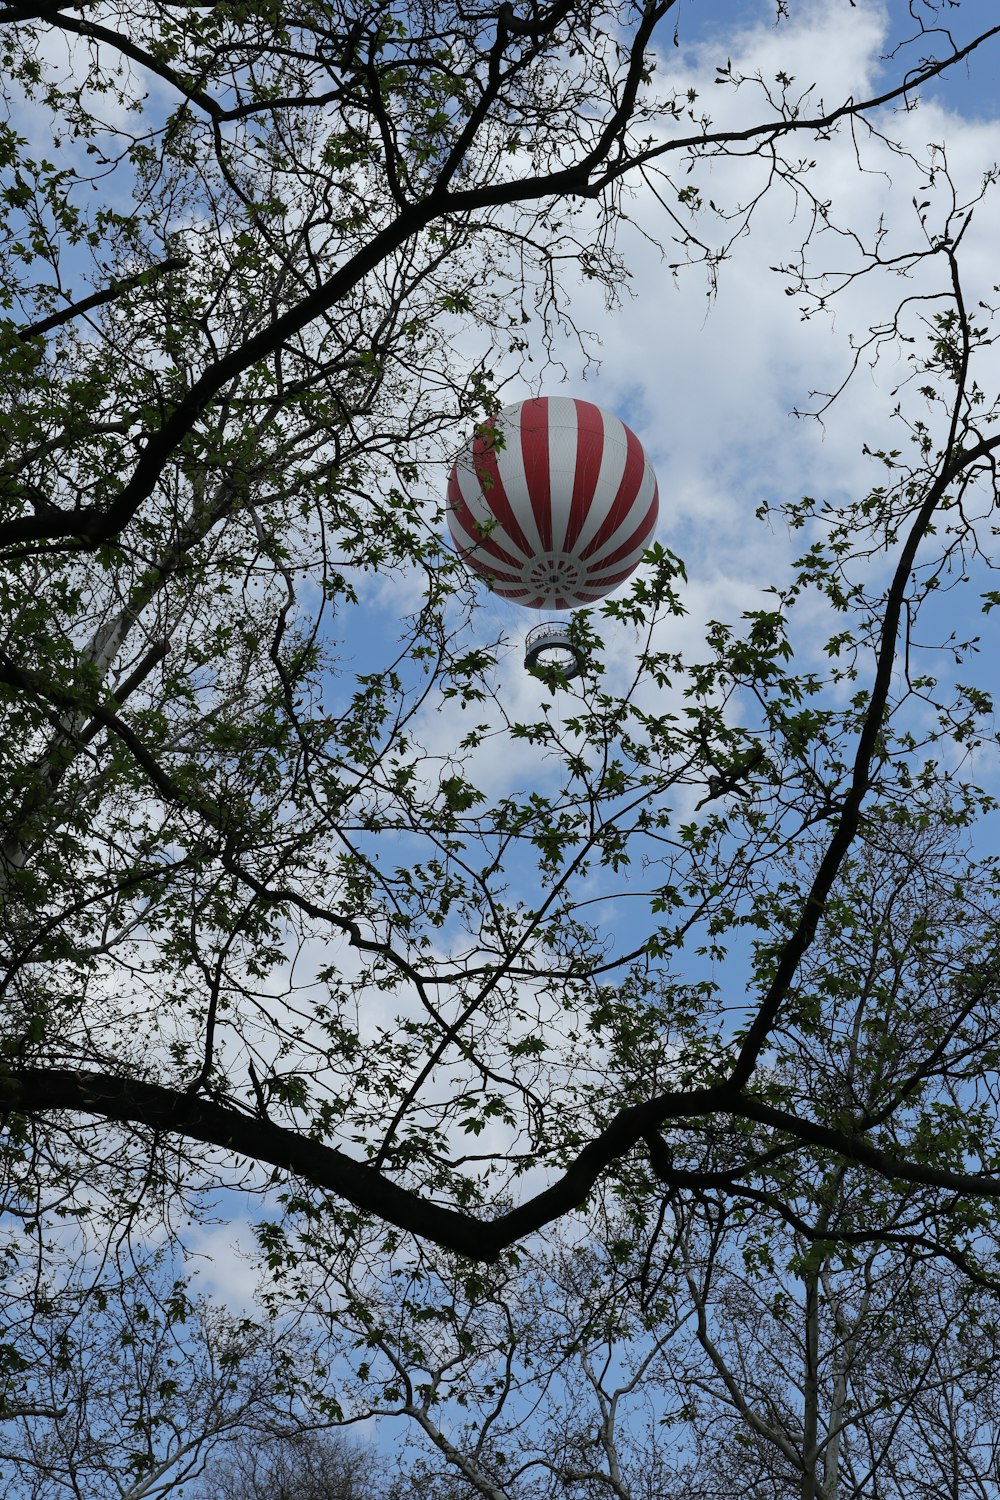 a red and white hot air balloon in the sky